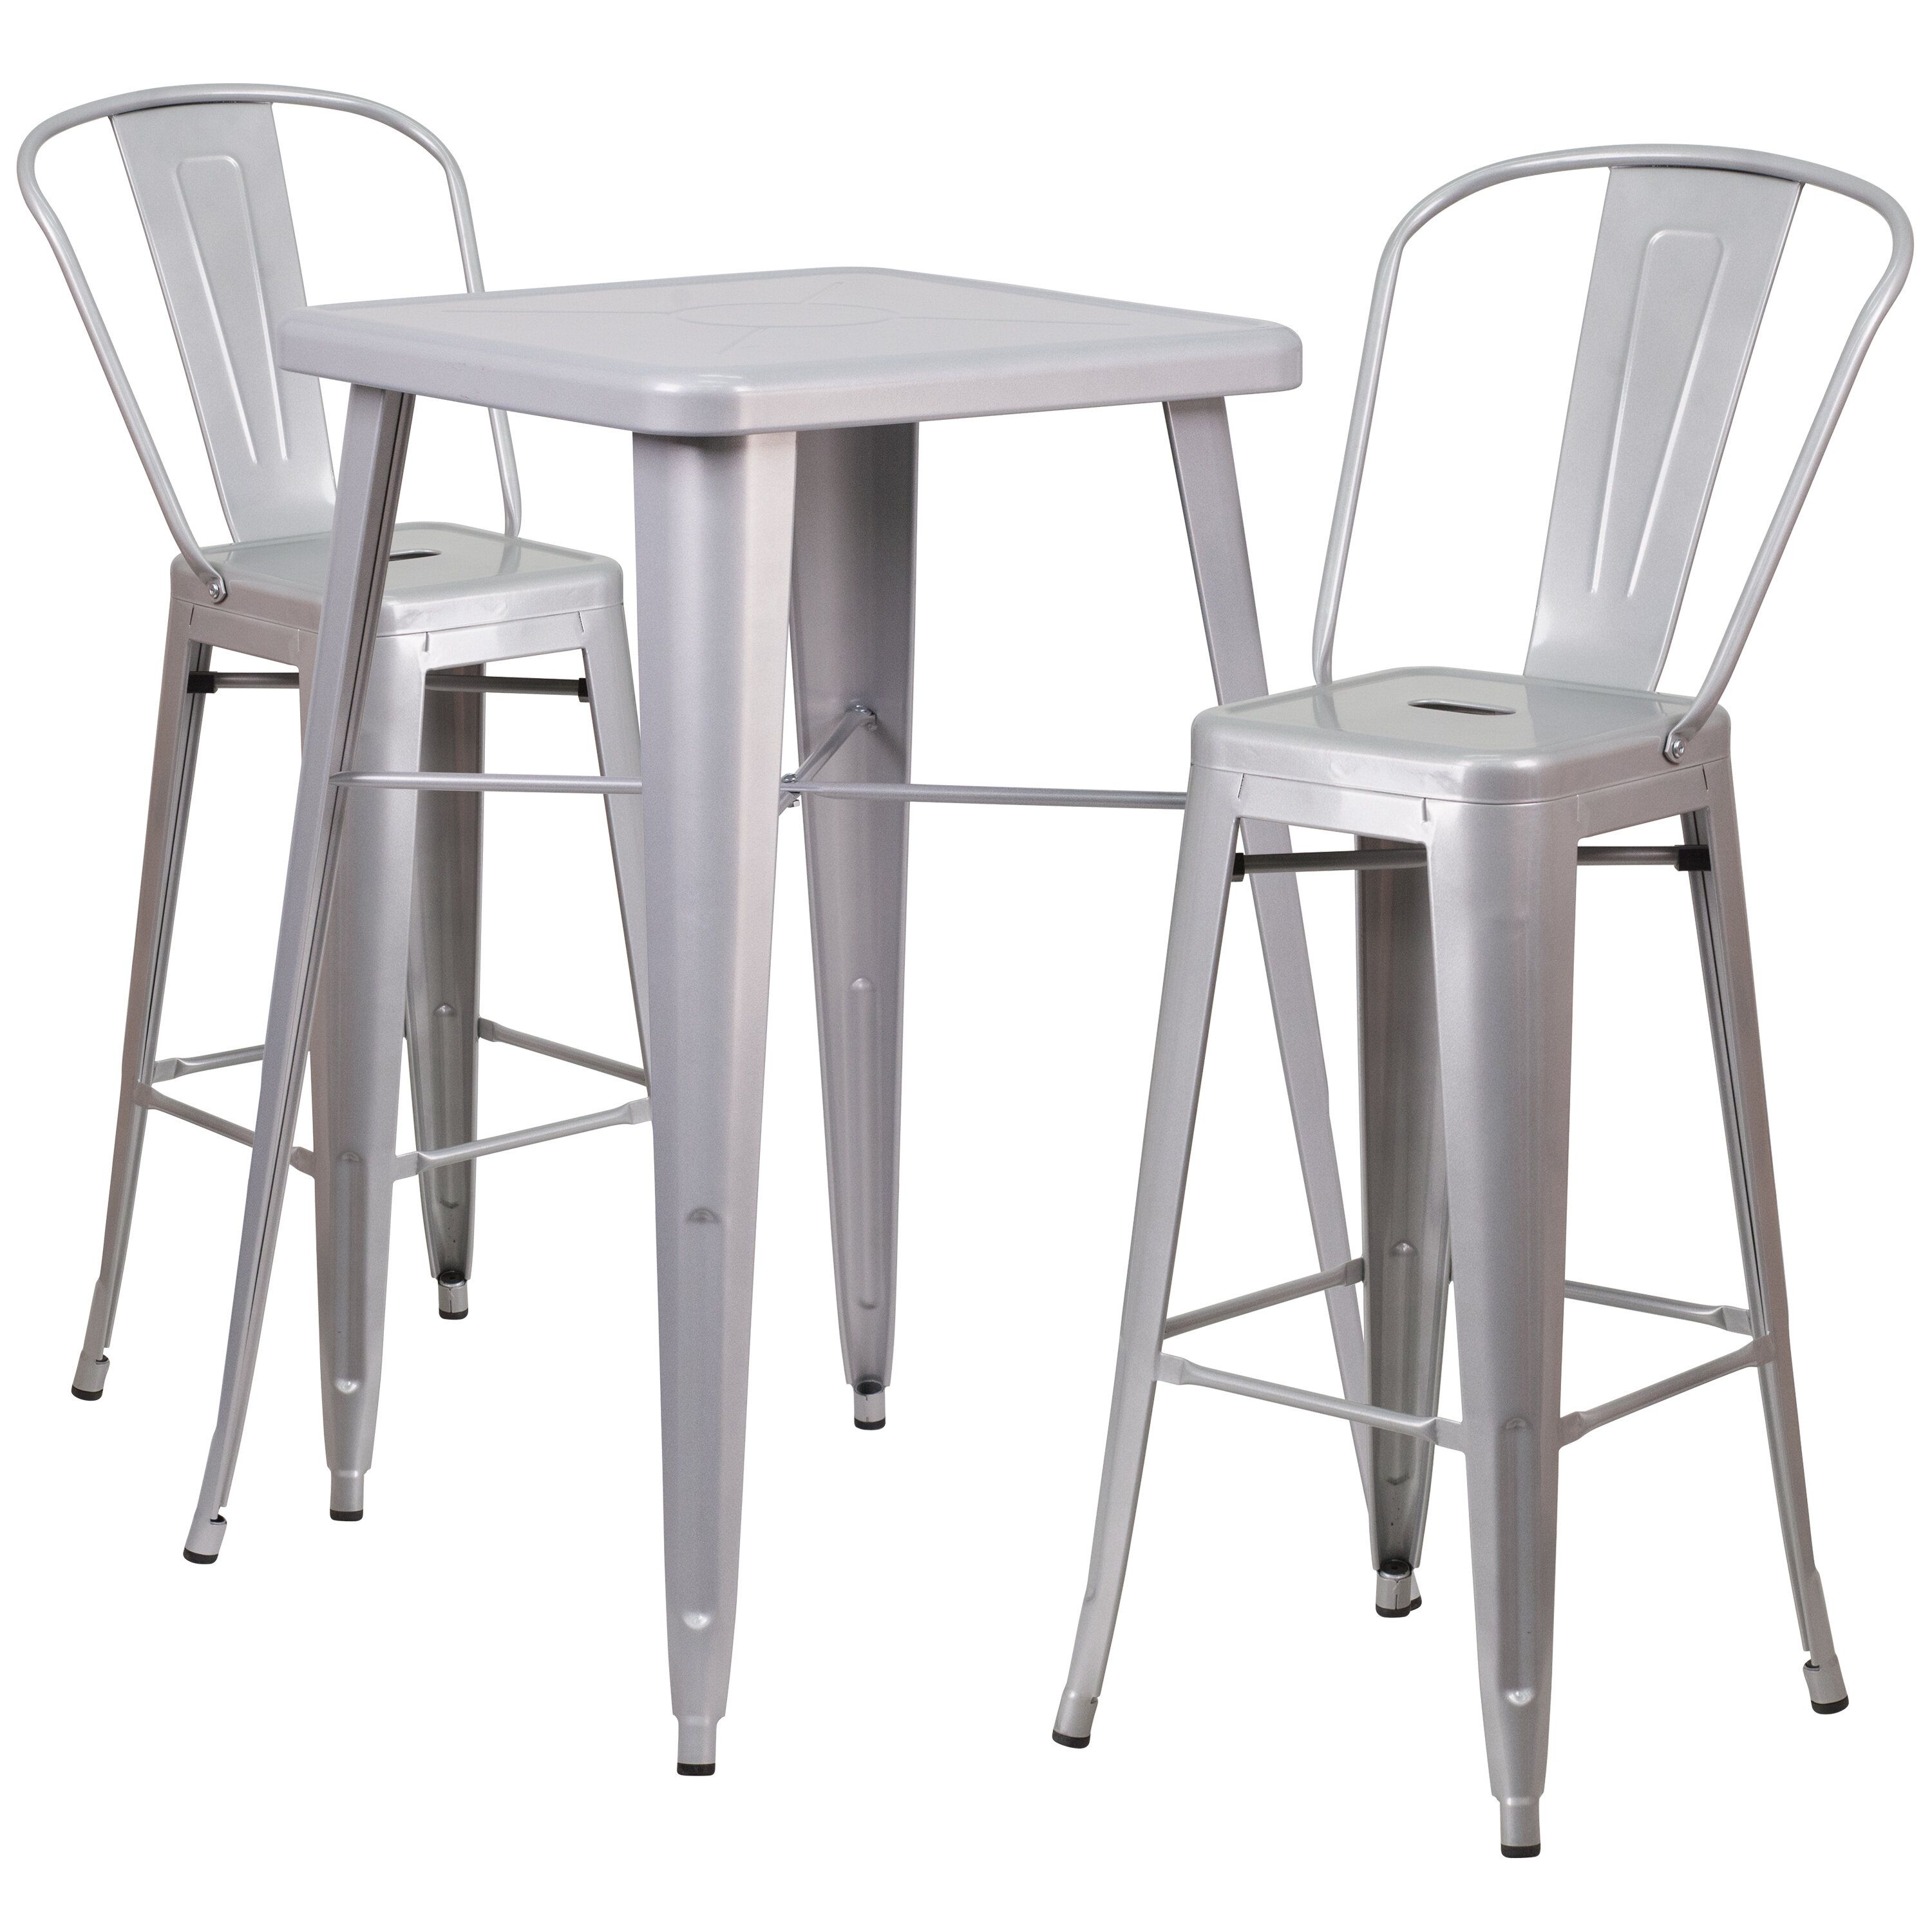 Suruga 3 Piece Pub Table Set Intended For Most Up To Date Honoria 3 Piece Dining Sets (View 16 of 20)